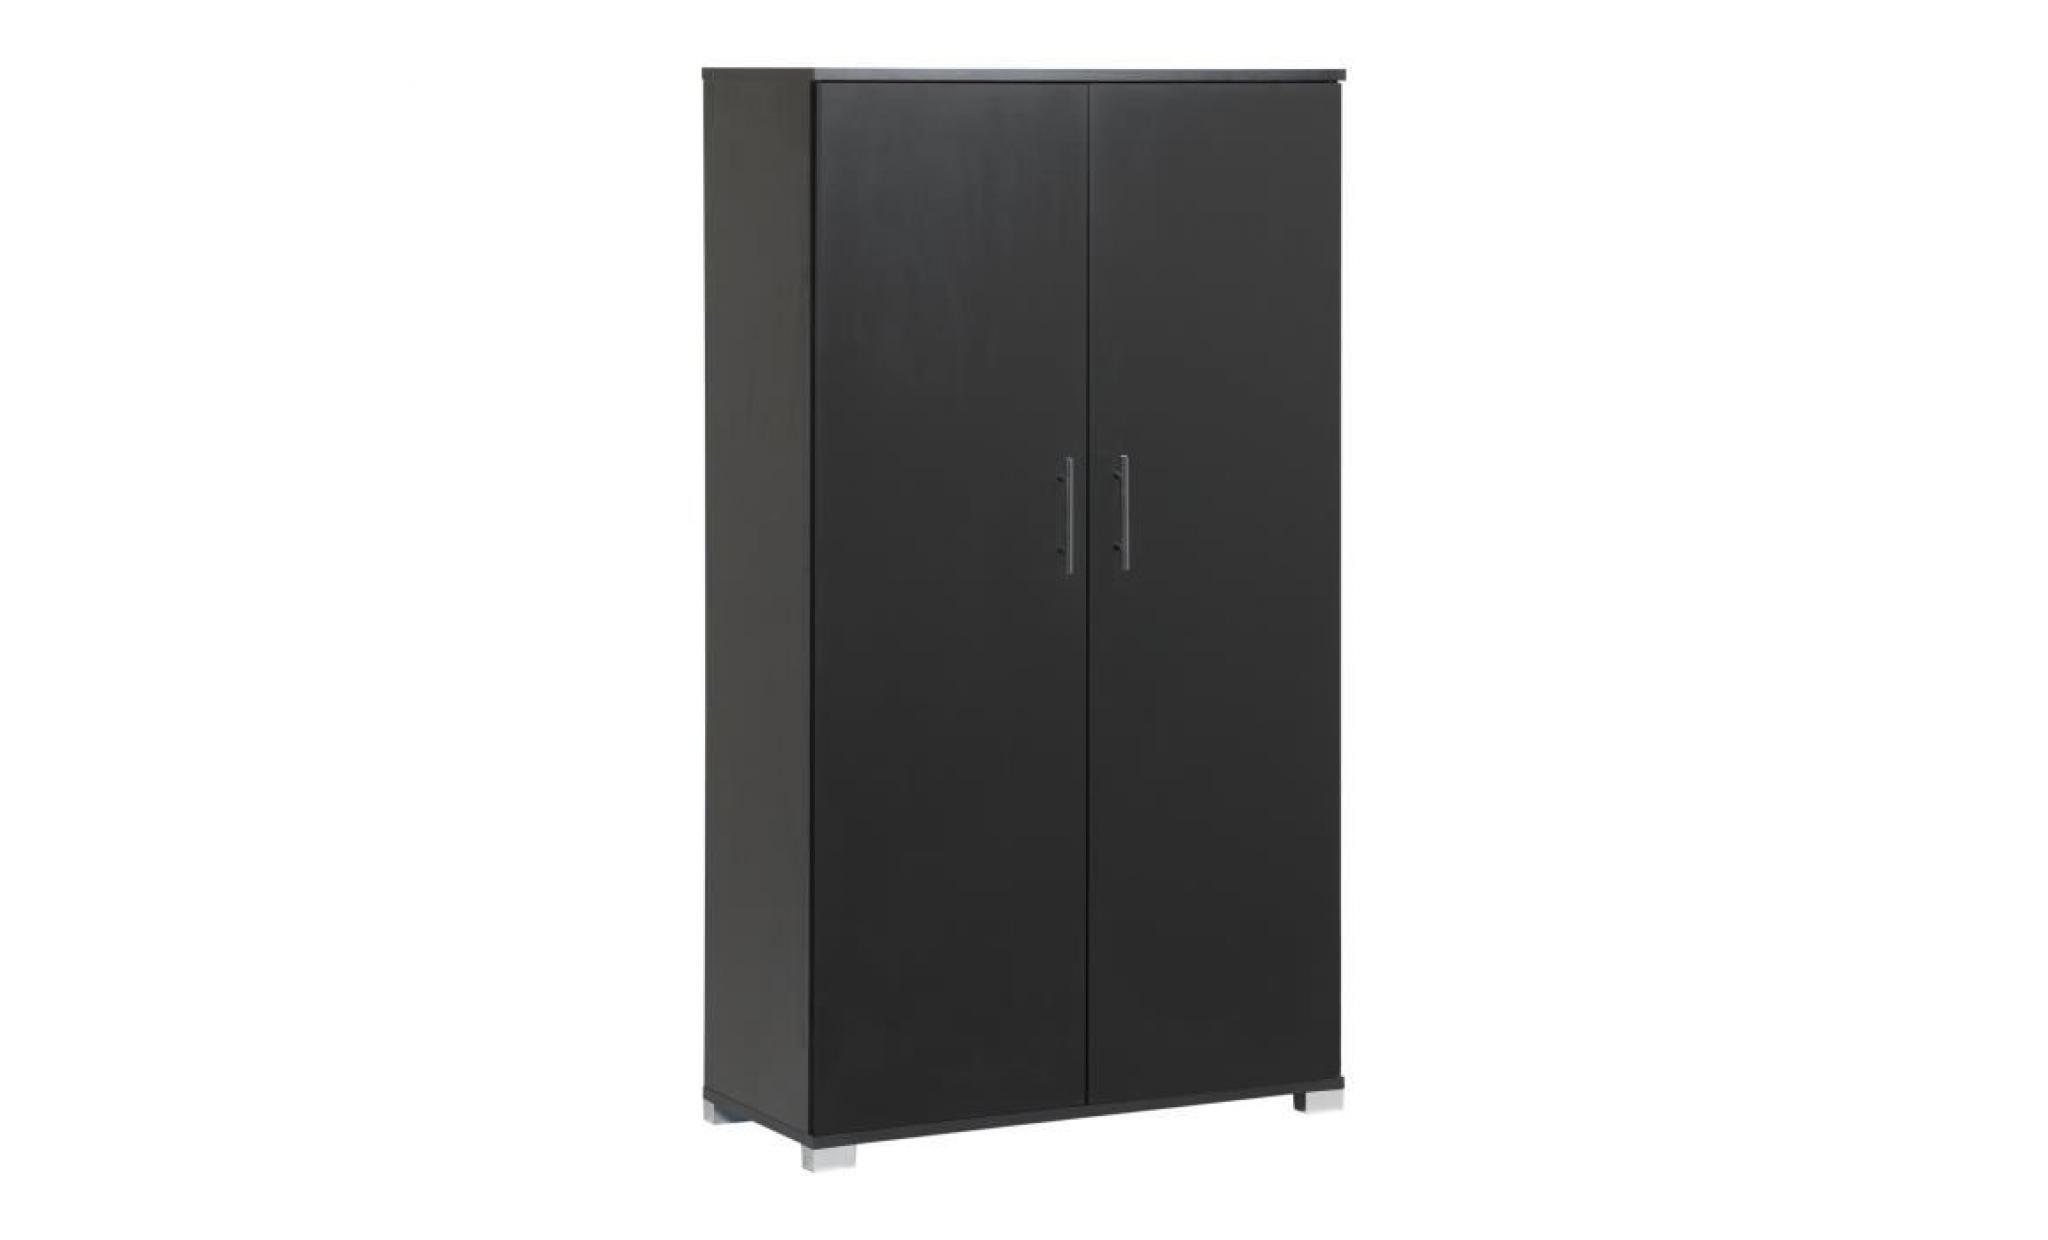 mmt black office 2 door bookcase storage filing cabinet cupboard with 3 internal shelves, easy to assemble